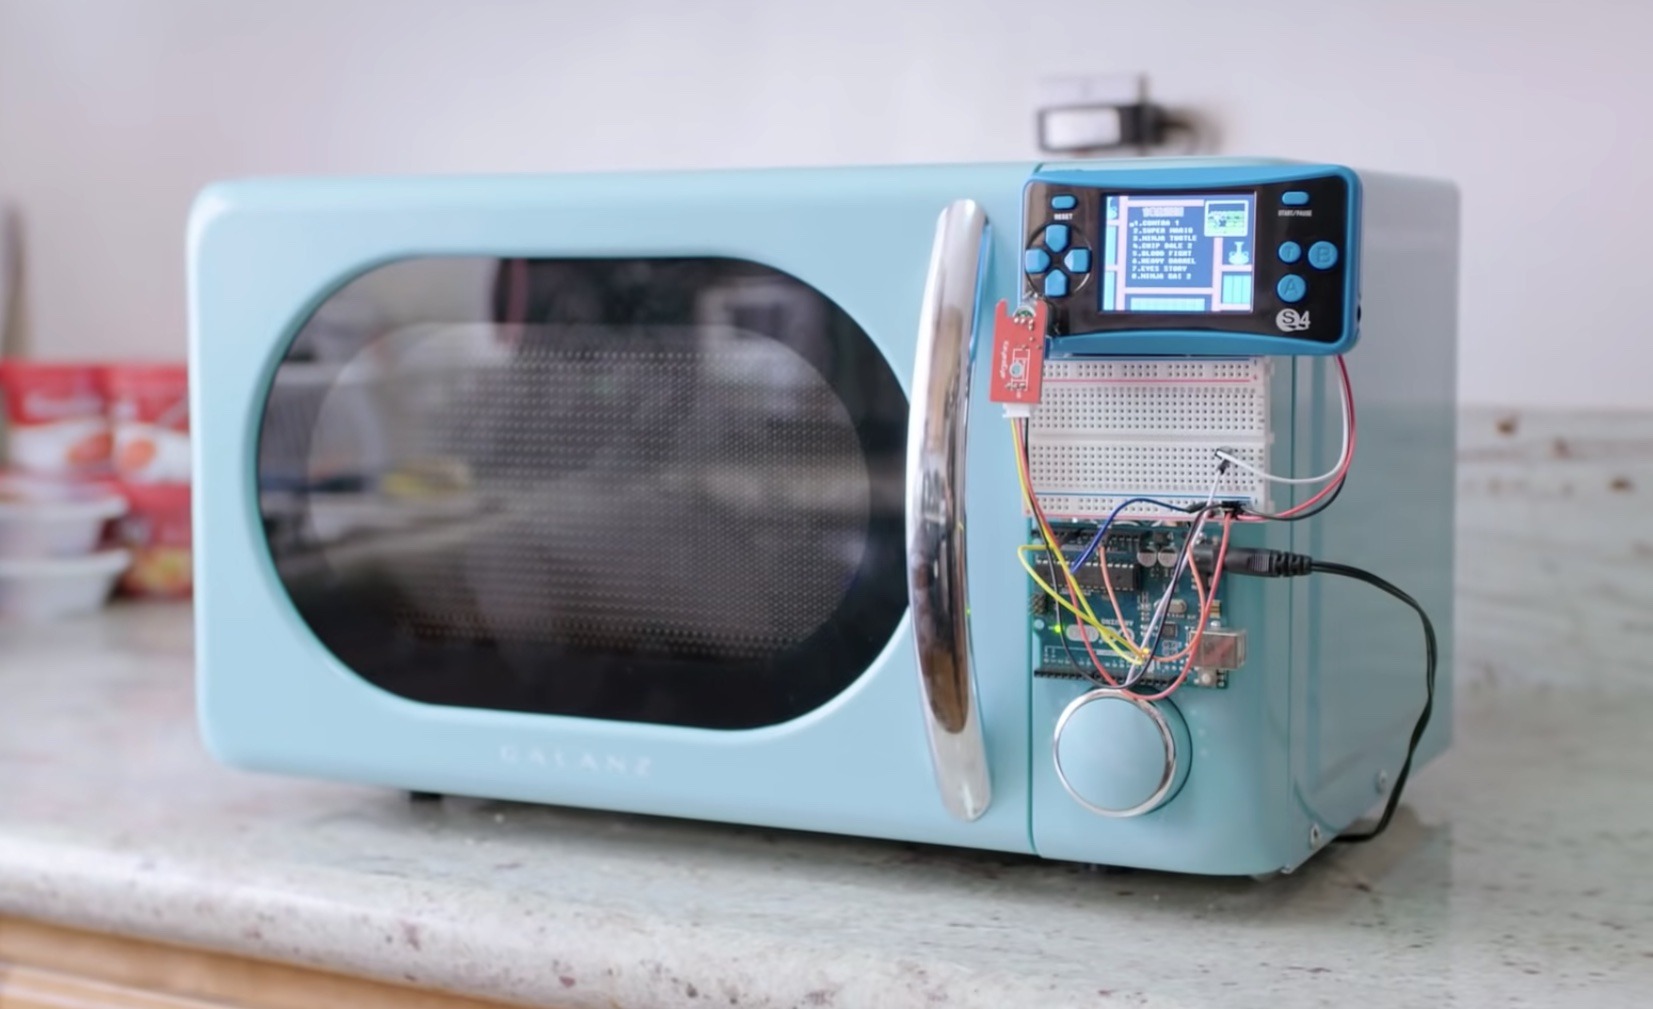 Allen Pan’s Arduino-controlled microwave only works while gaming